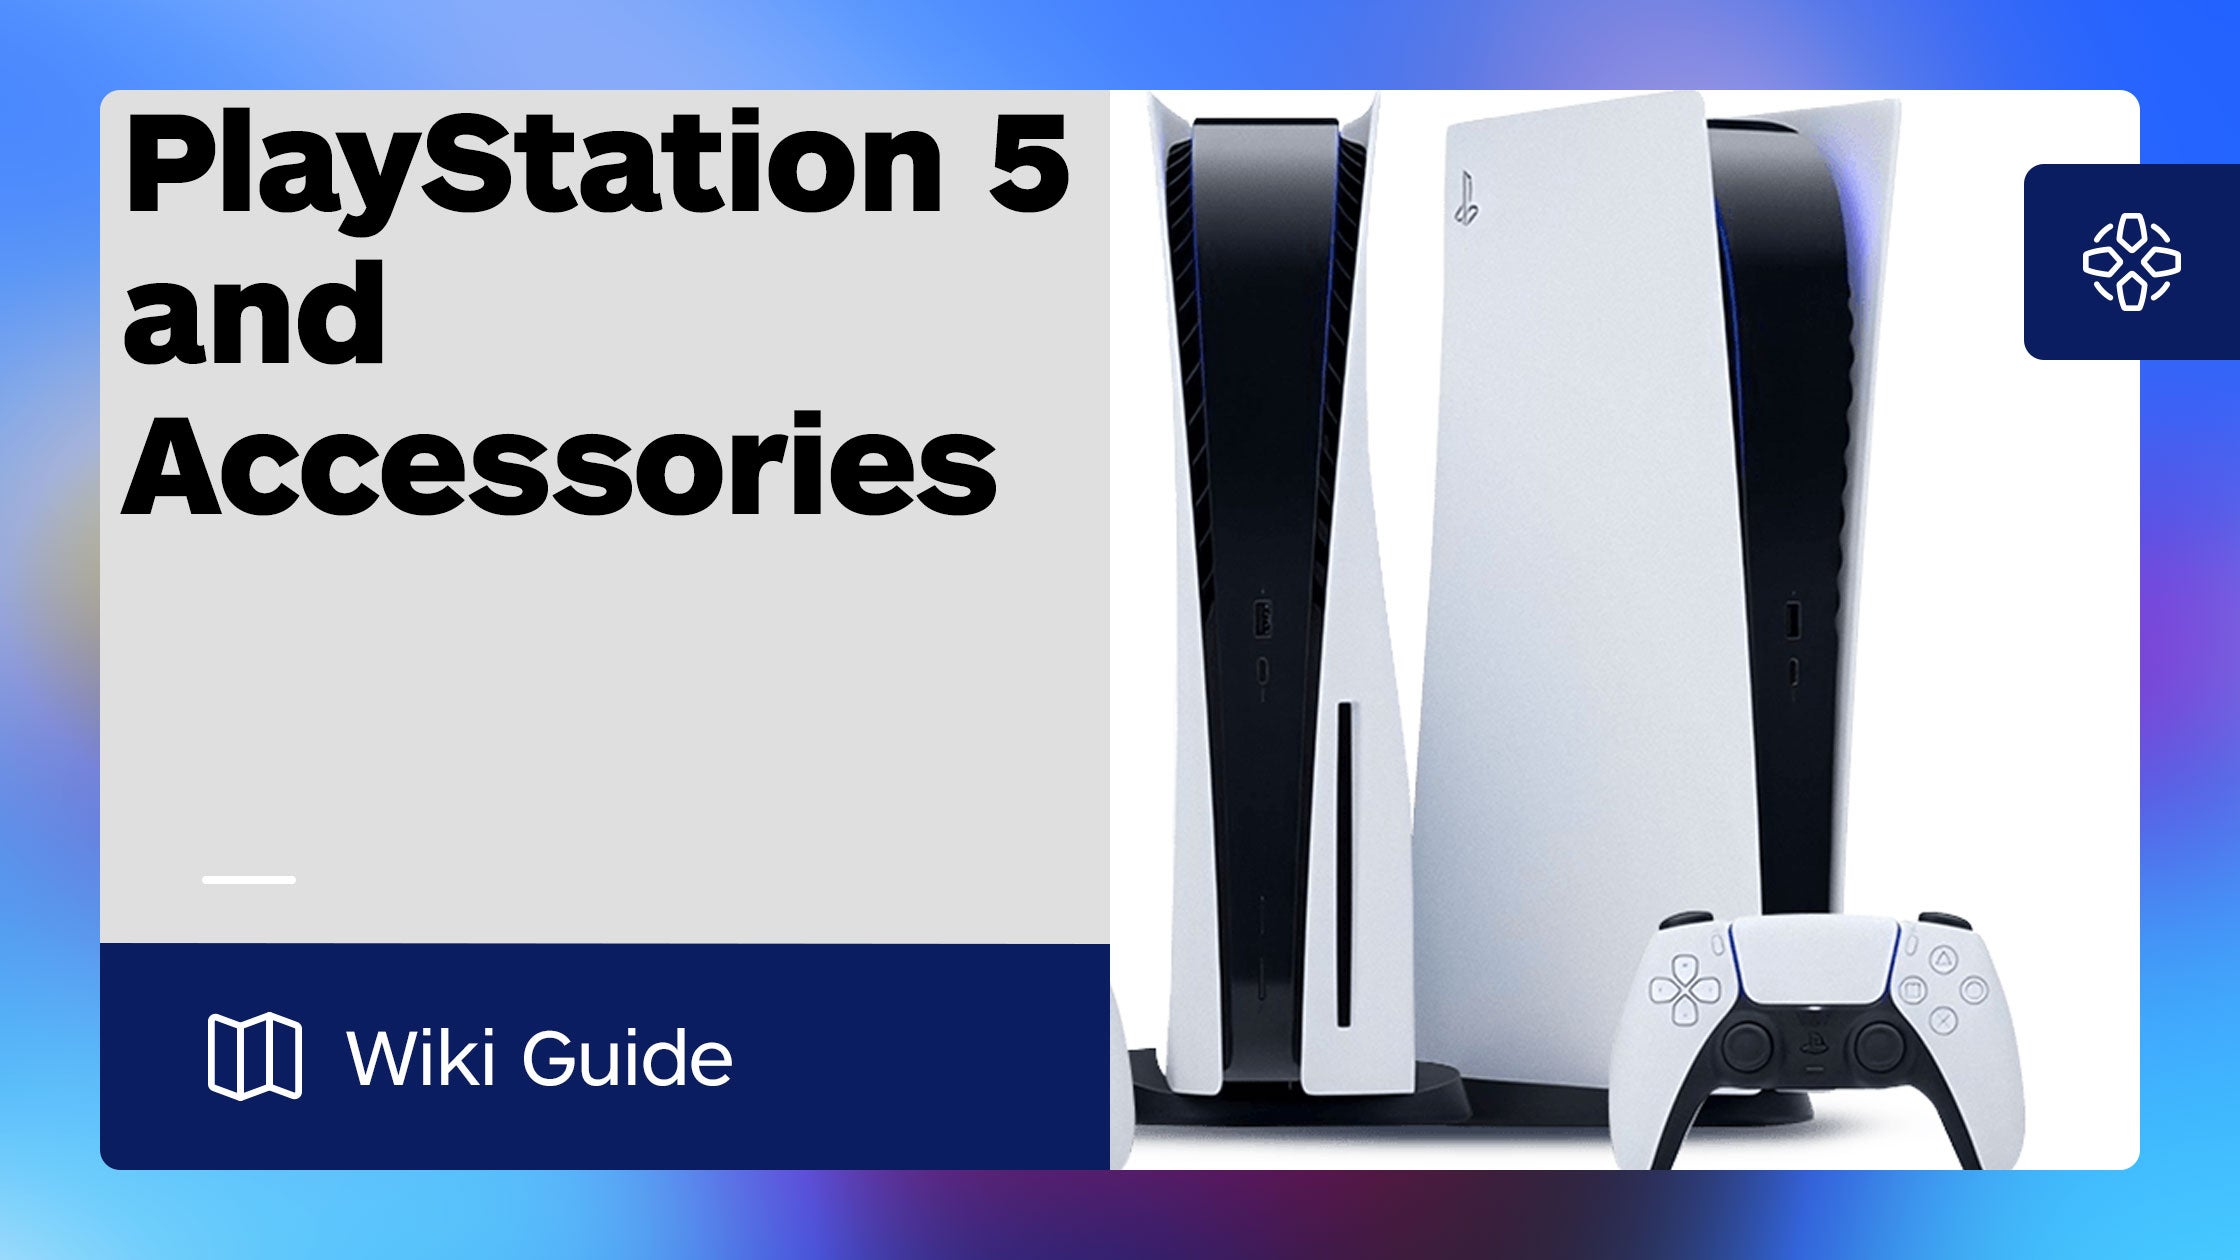 How to Change Your PSN Name – PlayStation 5 Guide